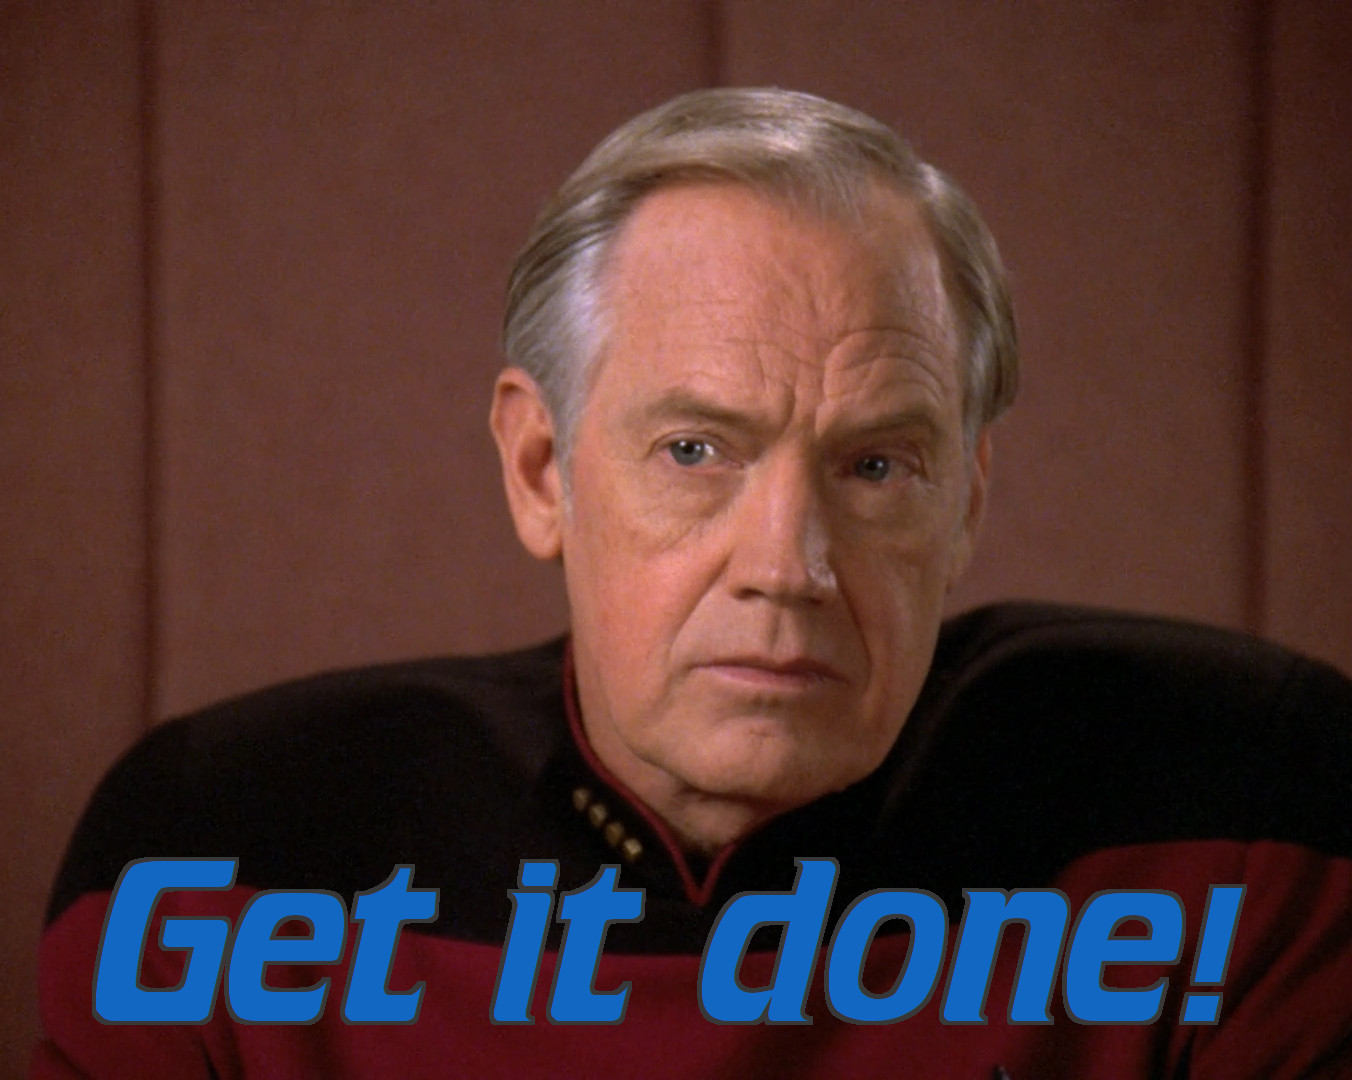 Ronny Cox as Captain Edward Jellico in Star Trek TNG, captioned "Get it done!"